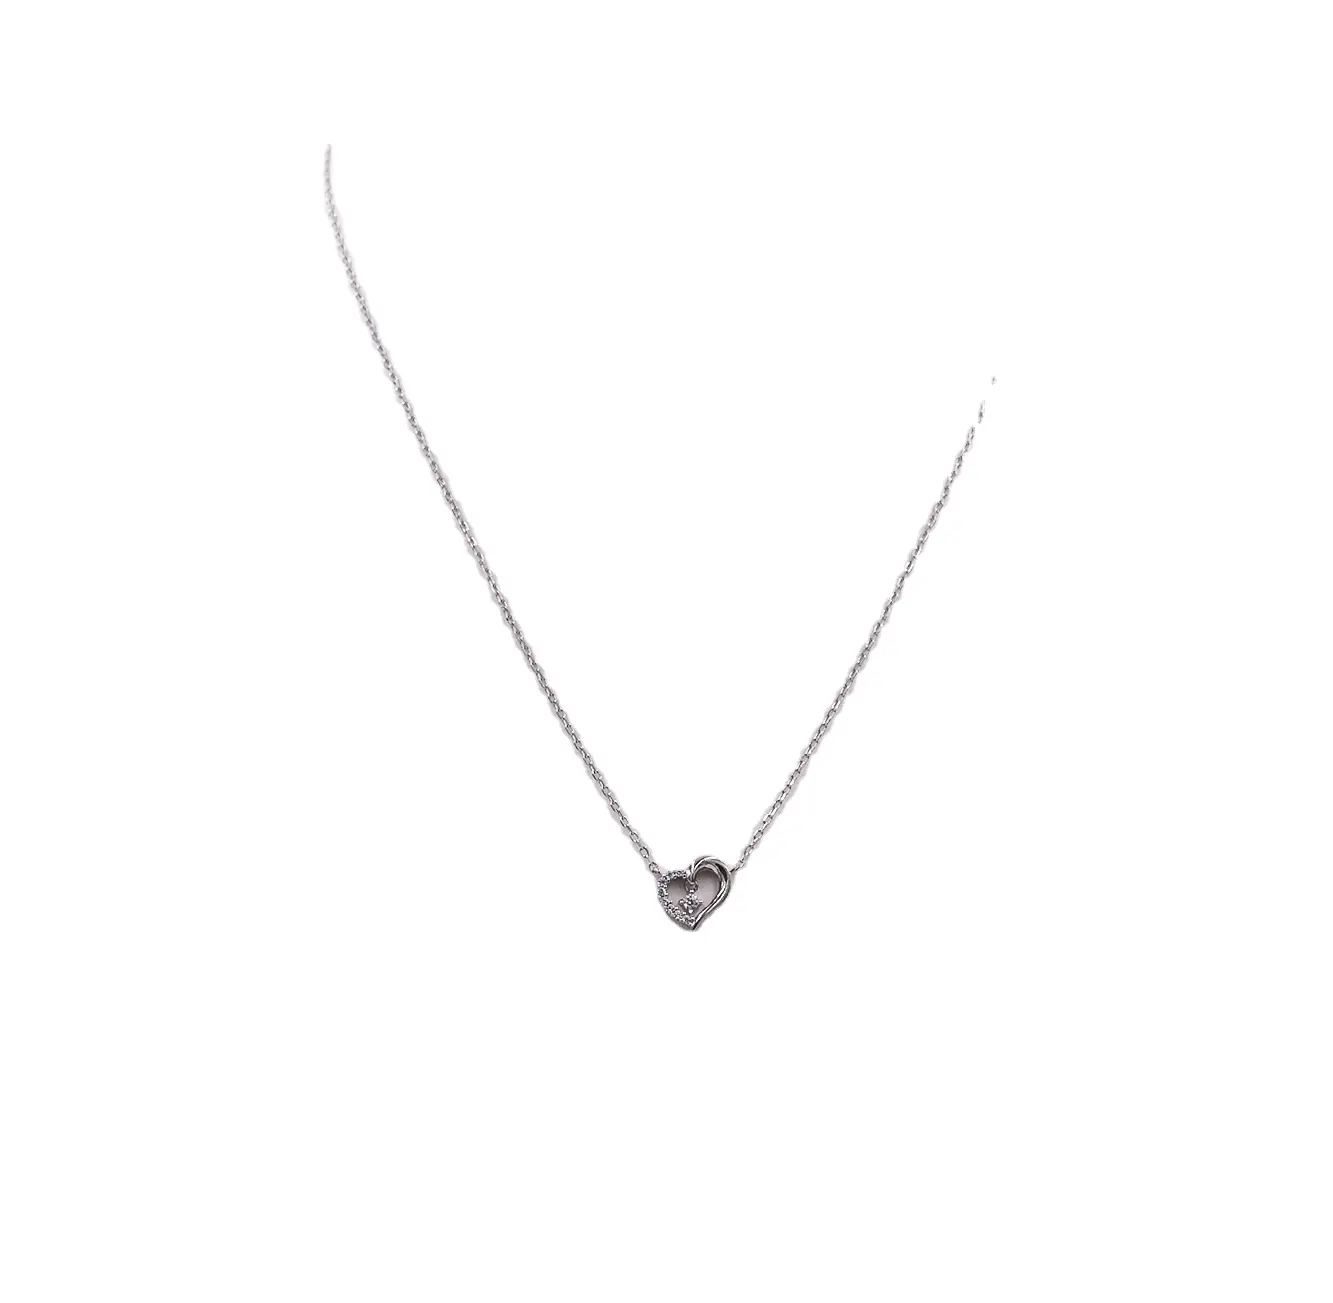 Romantic love heart shape silver 925 Rhodium plated cz necklace gift for women